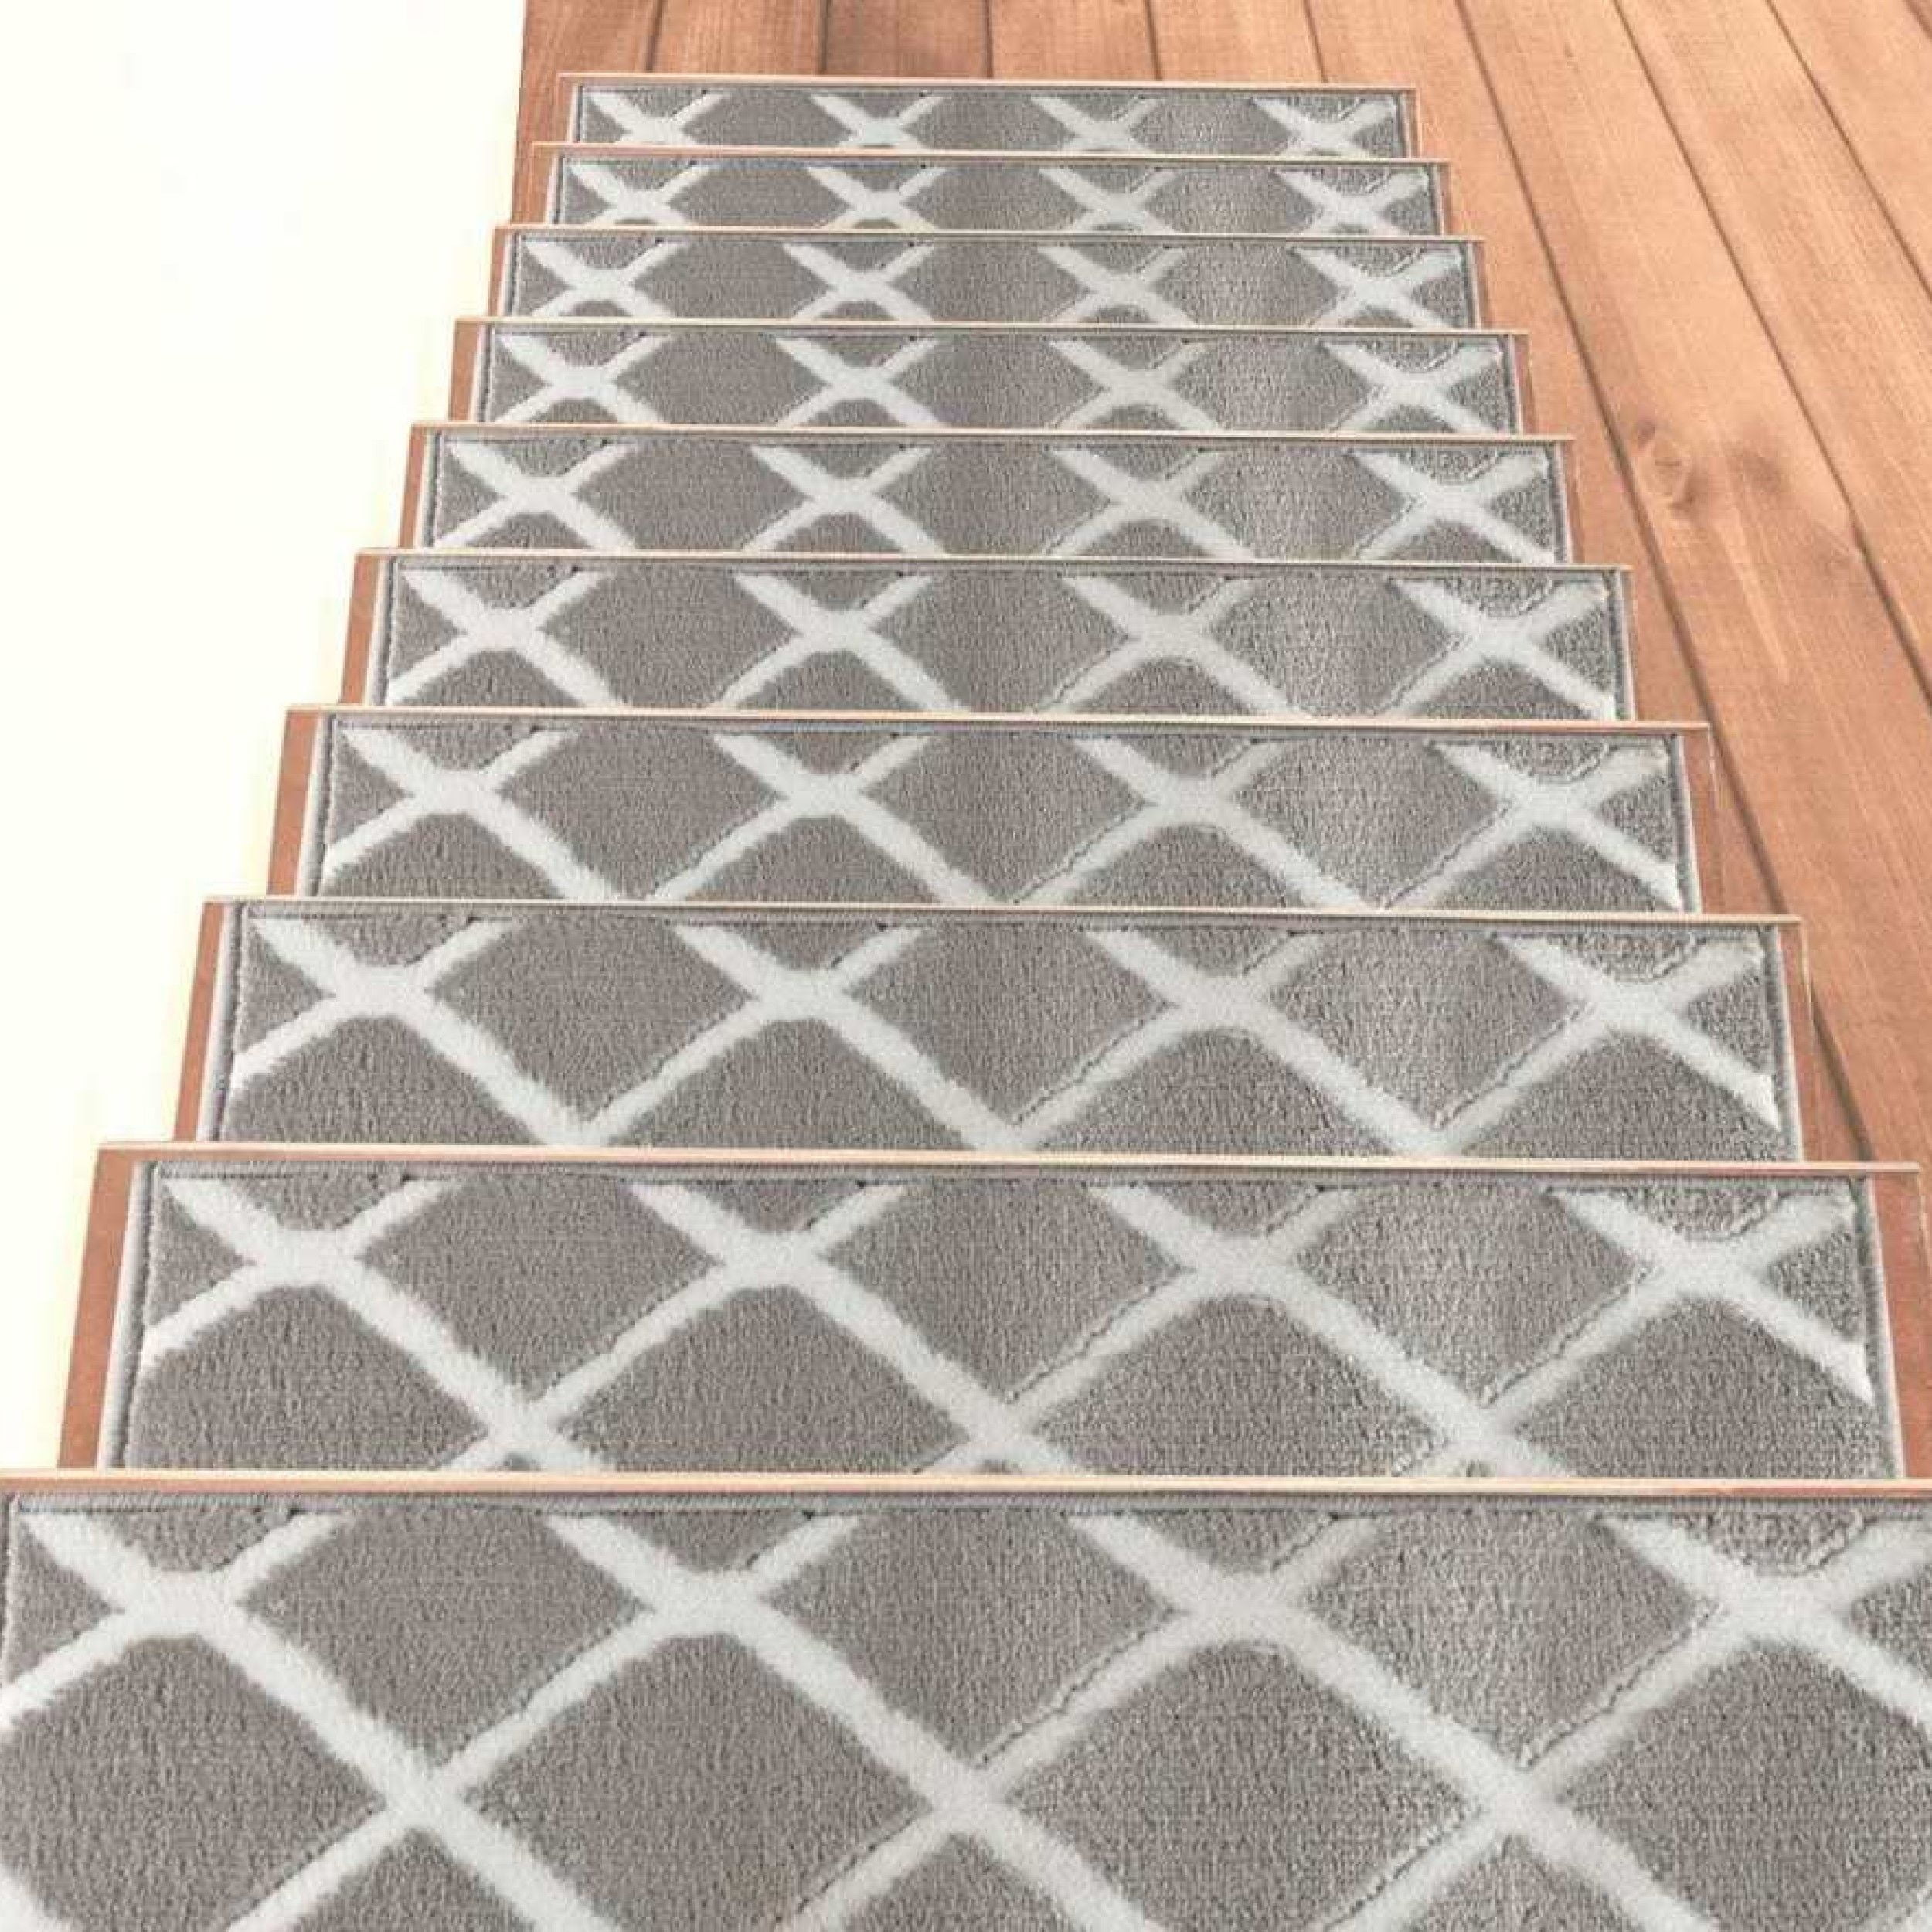 6'x24' - Green Multi - Indoor/Outdoor Area Rug Carpet, Runners & Stair  Treads with a Light Weight Latex Backing